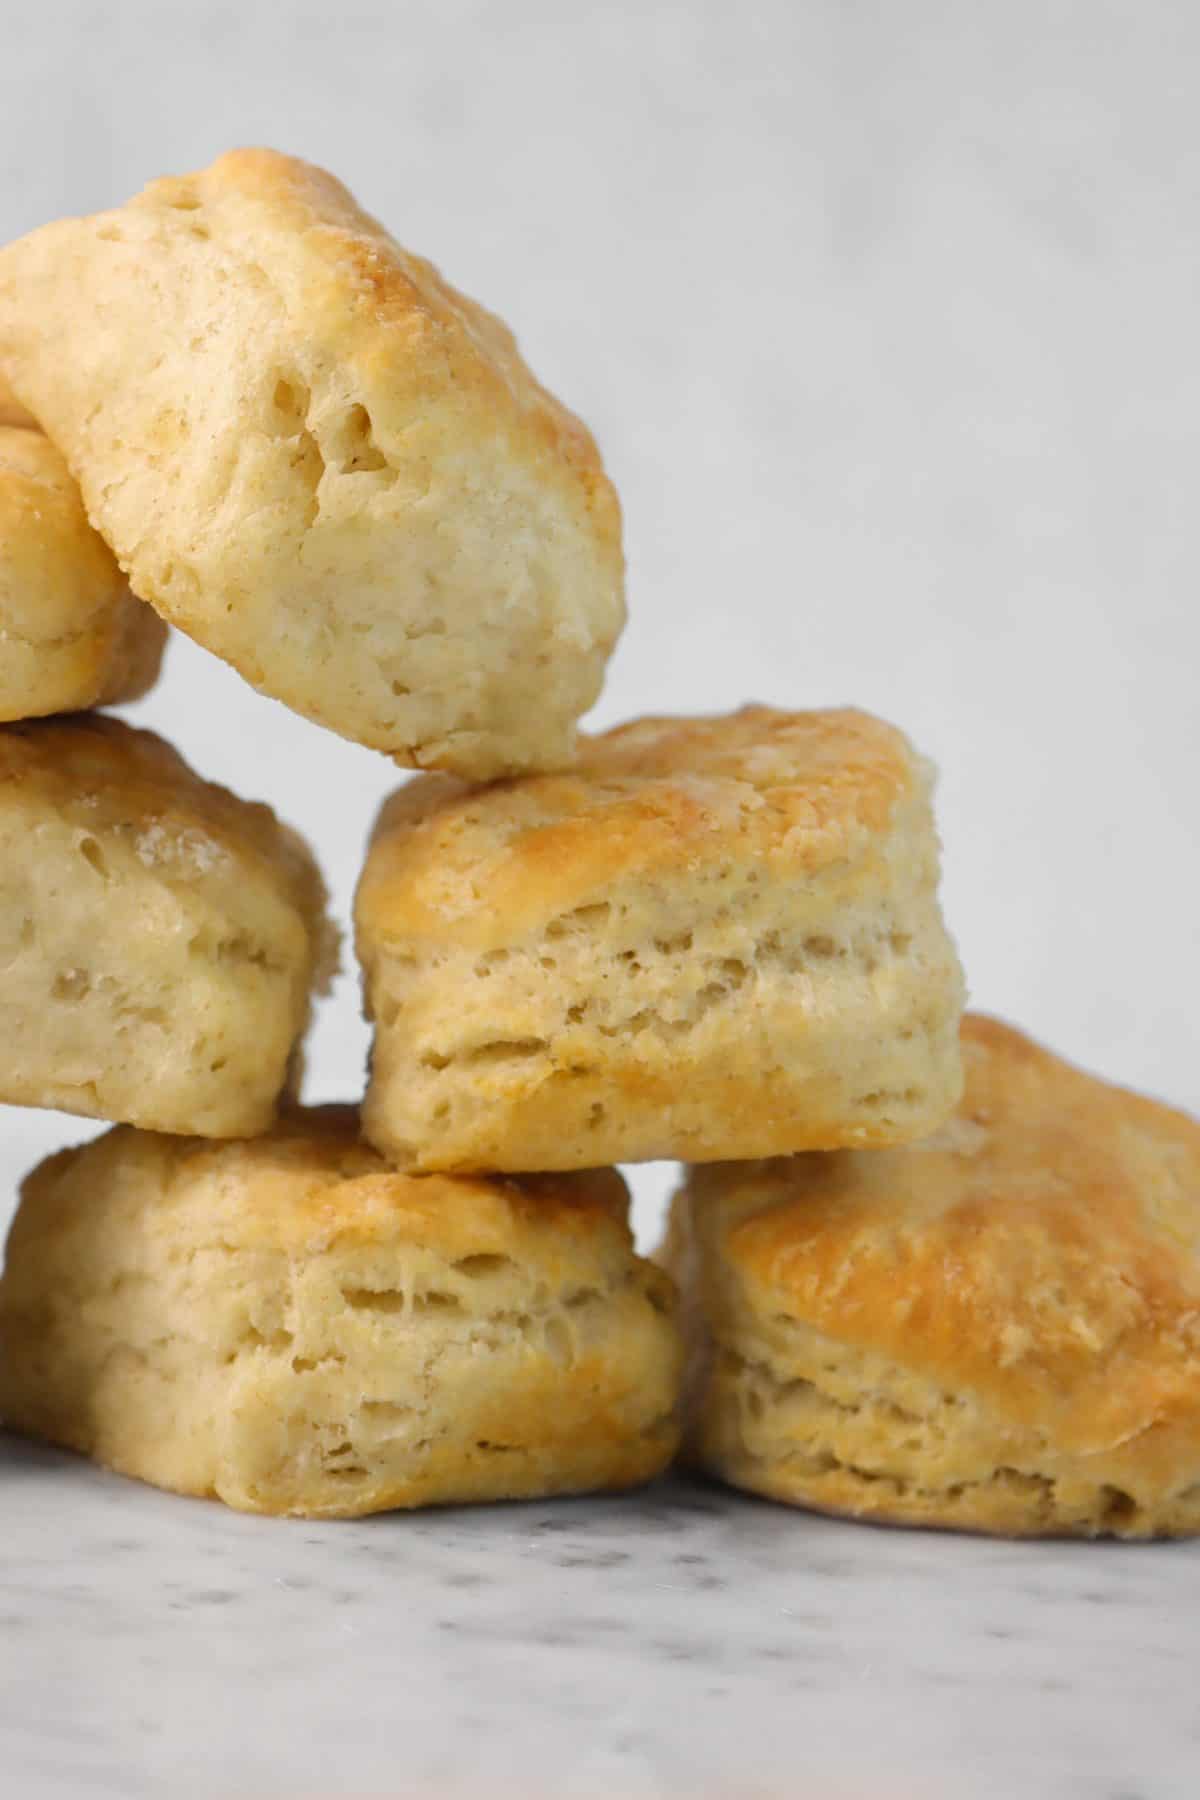 biscuits stacked on top of each other on a marble counter